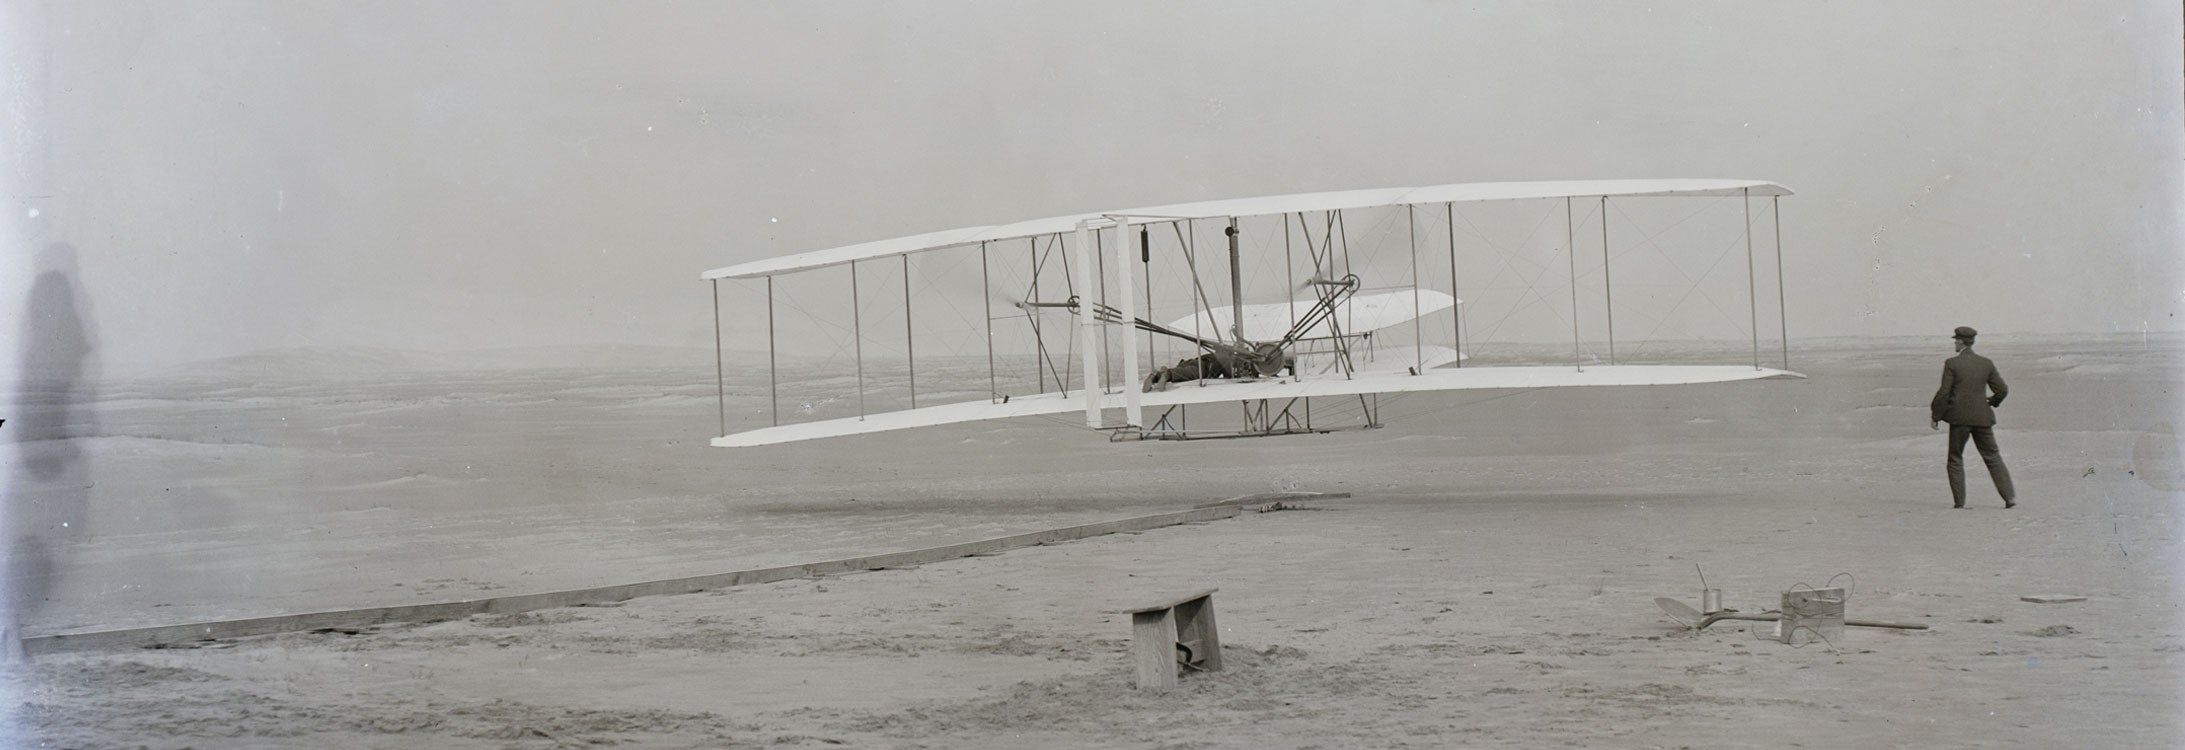 Orville and Wilbur Wright fly the first airplane at Kitty Hawk on Dec. 17, 1093. Photo courtesy of Library of Congress